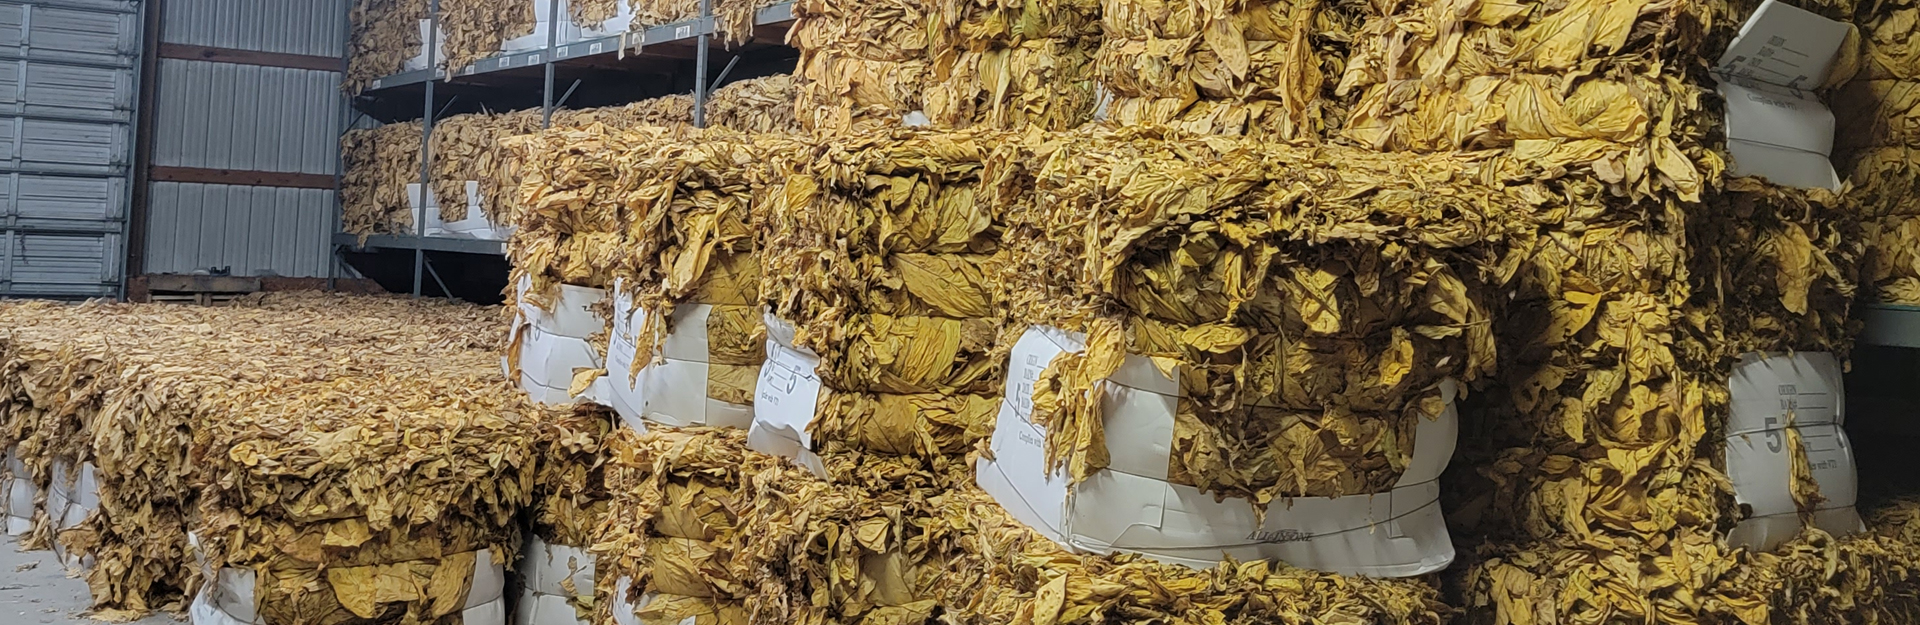 tobacco drying in a warehouse